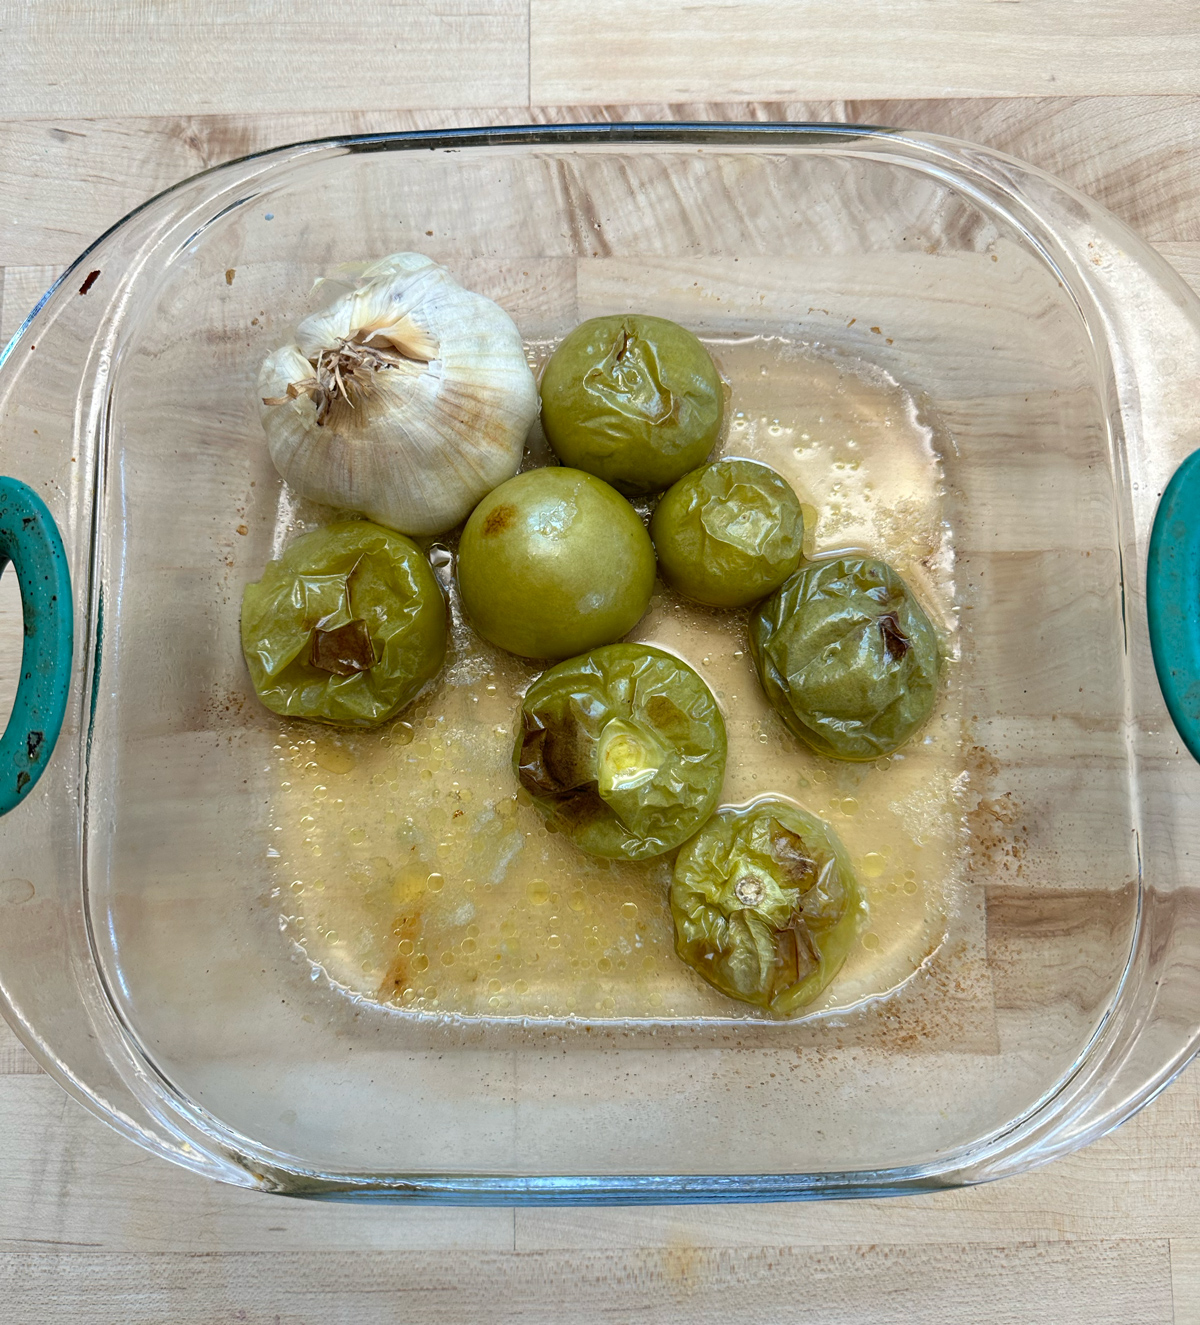 Tomatillos and garlic for chile verde